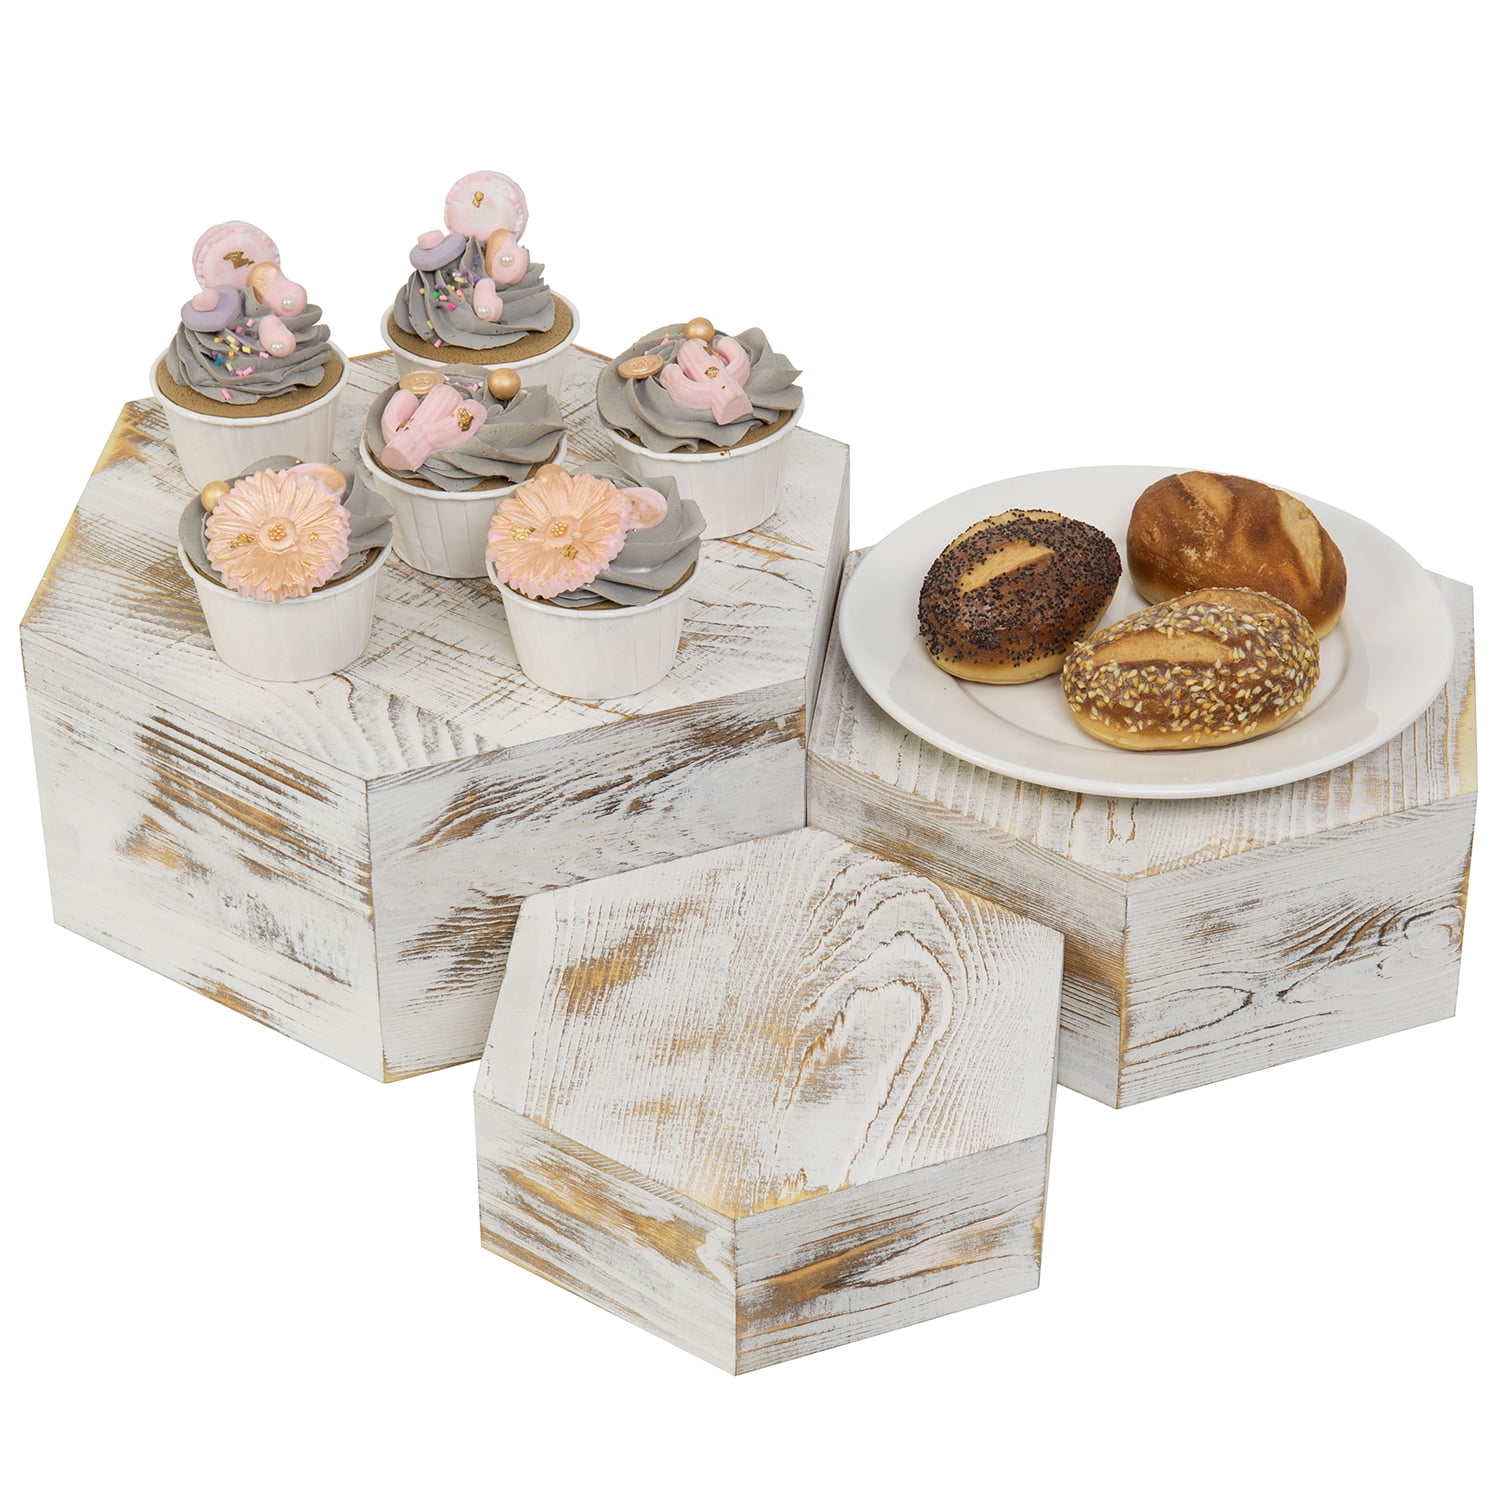 Set of 3 MyGift Shabby Whitewashed Wood Round Dessert and Bakery Retail Display Riser Stands 